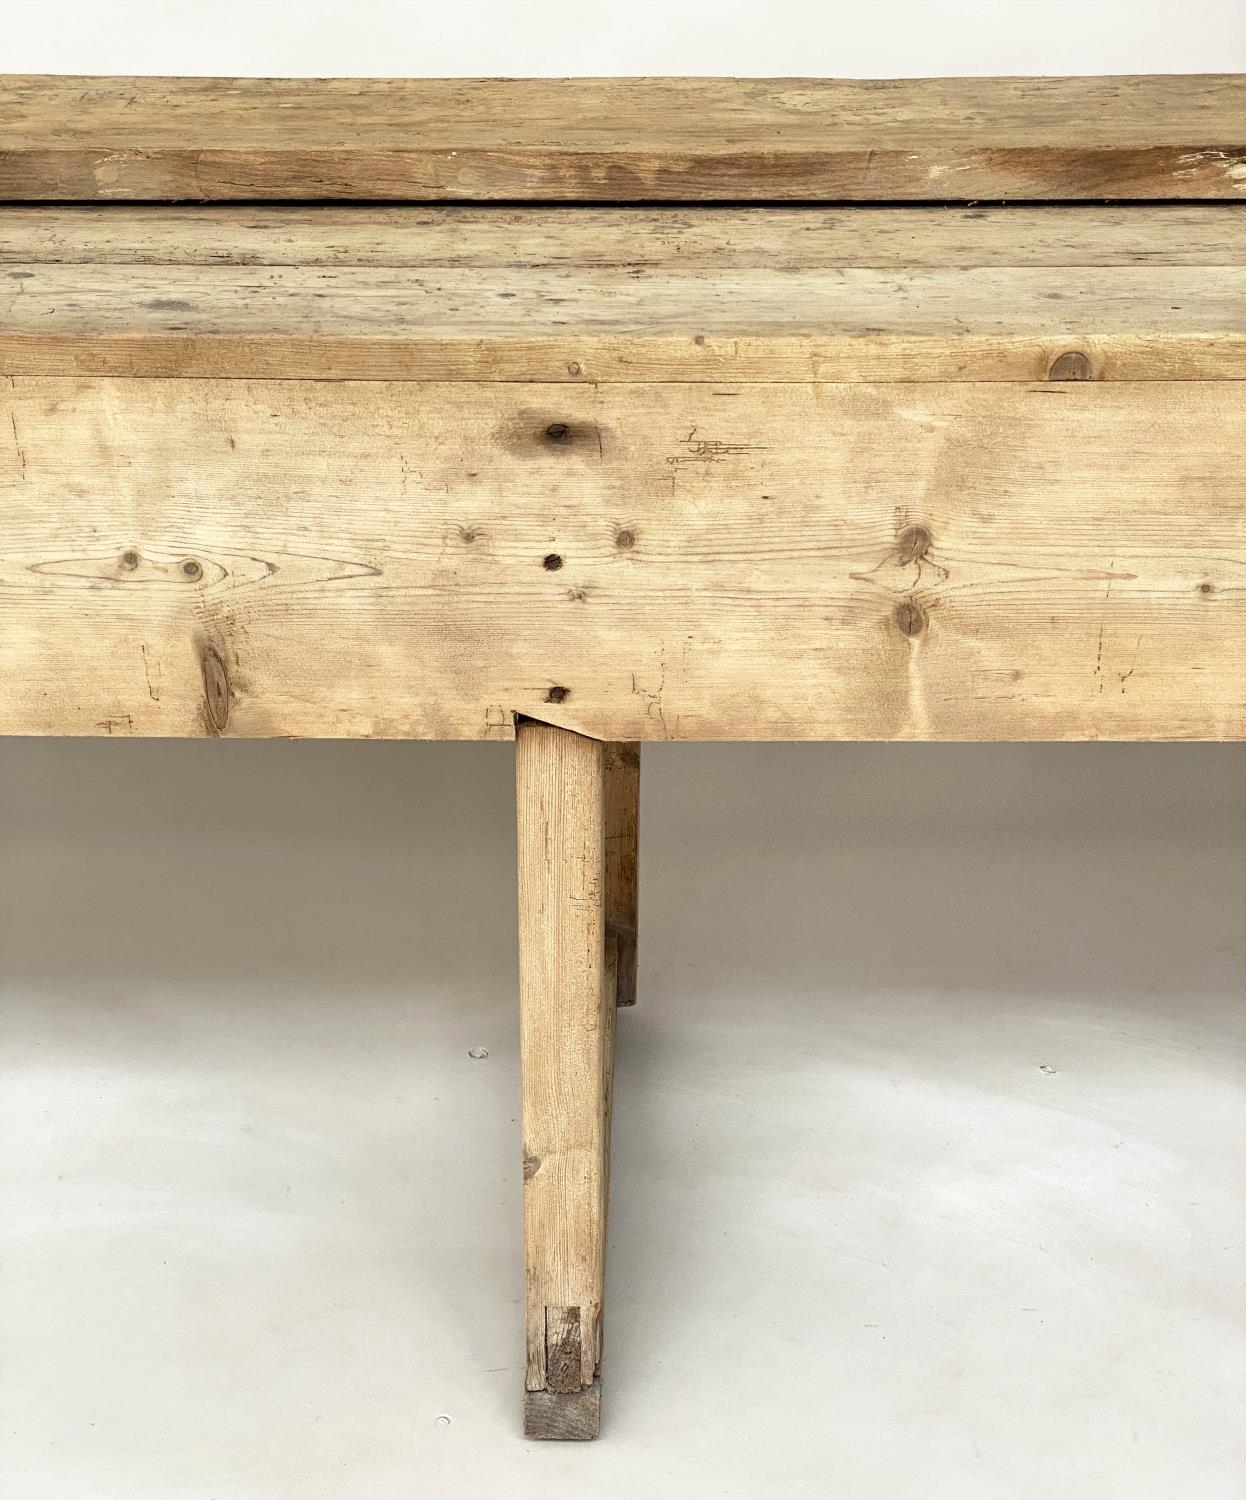 WORK BENCH, vintage/early 20th century broad planked pine, 211cm x 62cm x 80cm H. - Image 5 of 8